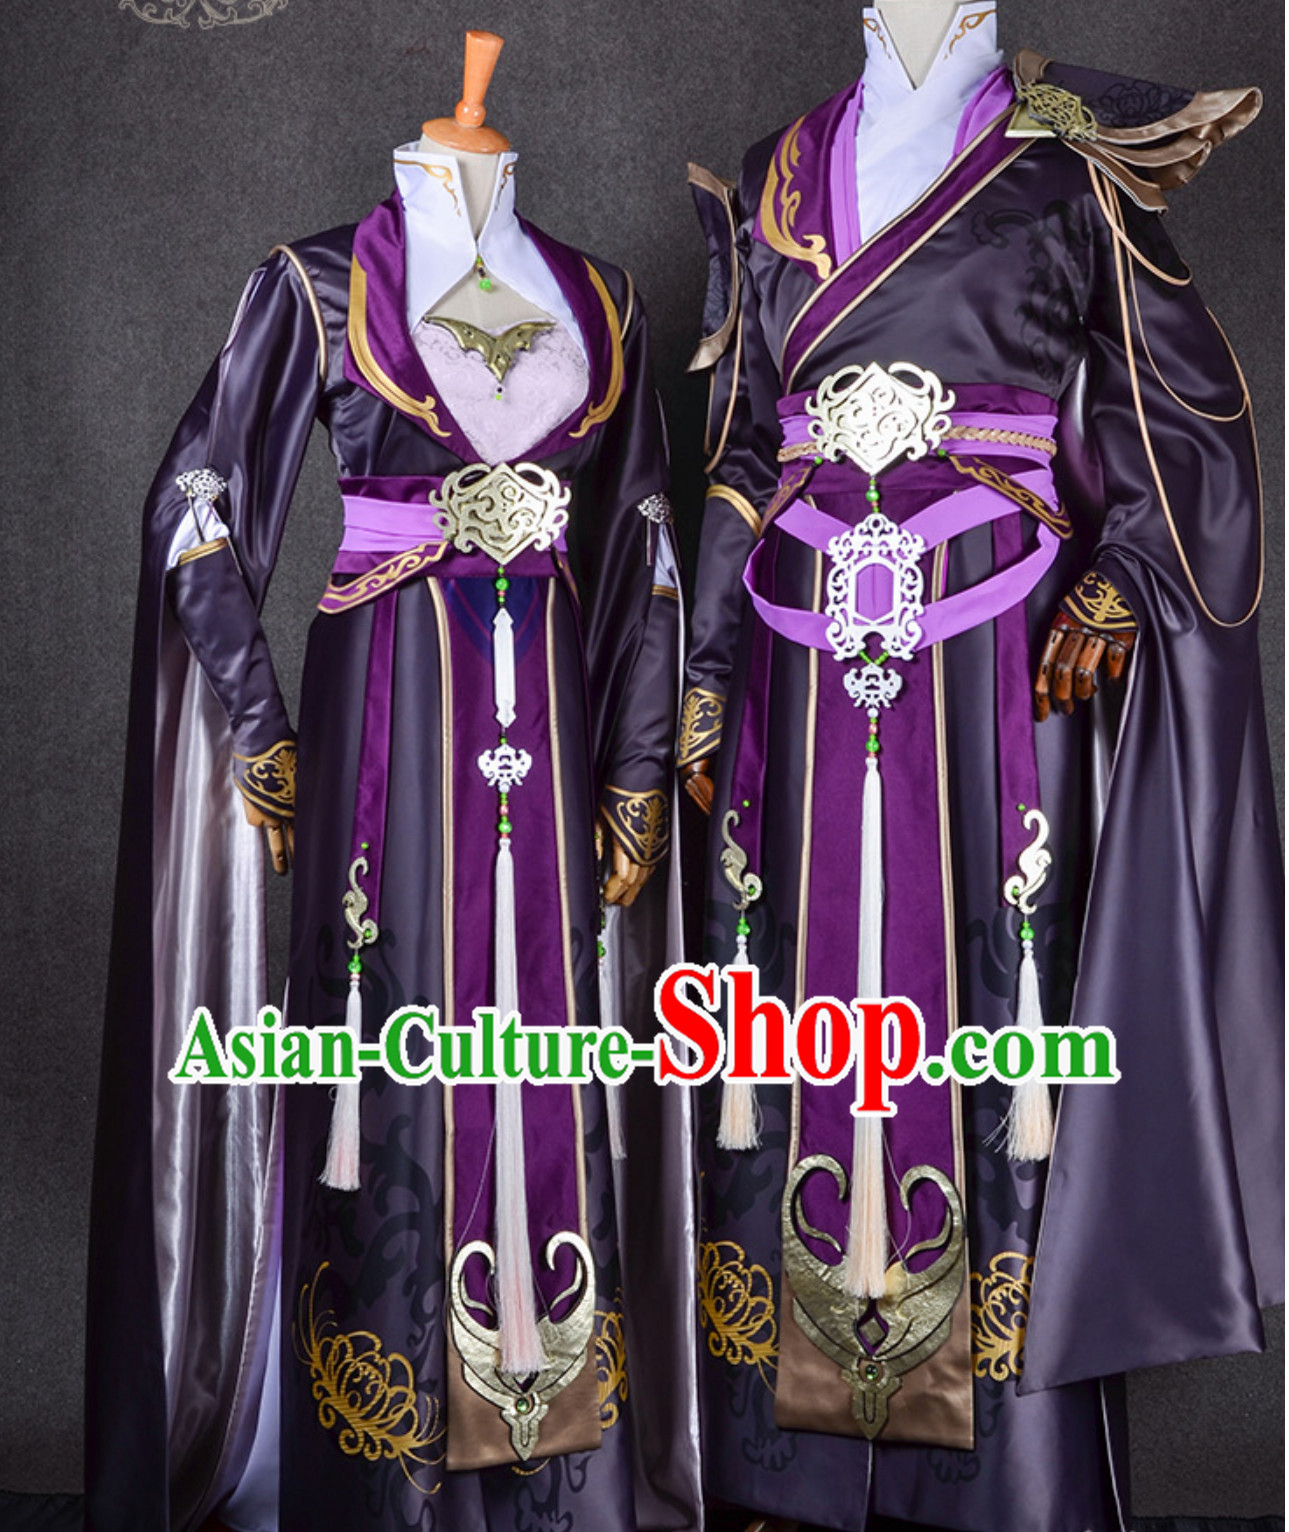 Ancient Chinese Swordsman Swordswoman Cosplay Superhero Costumes 2 Complete Sets for TV Show Film or Performance